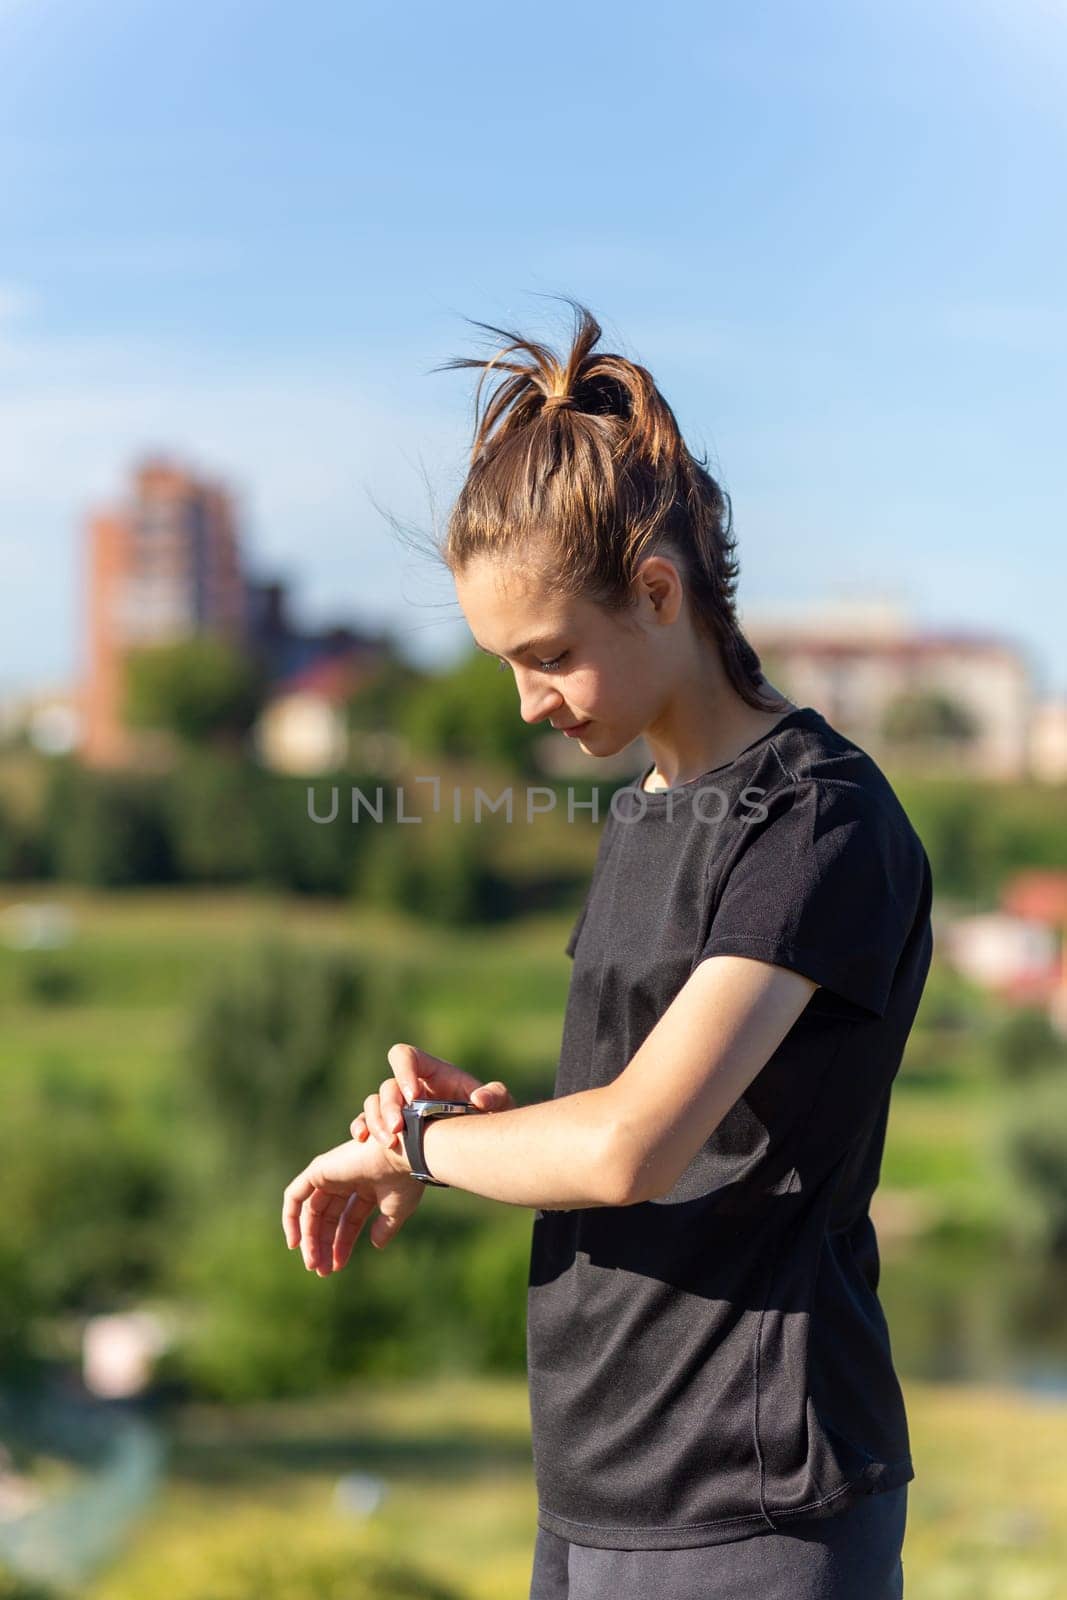 Teenage girl in black clothes checking her fitness watch after a workout. by BY-_-BY